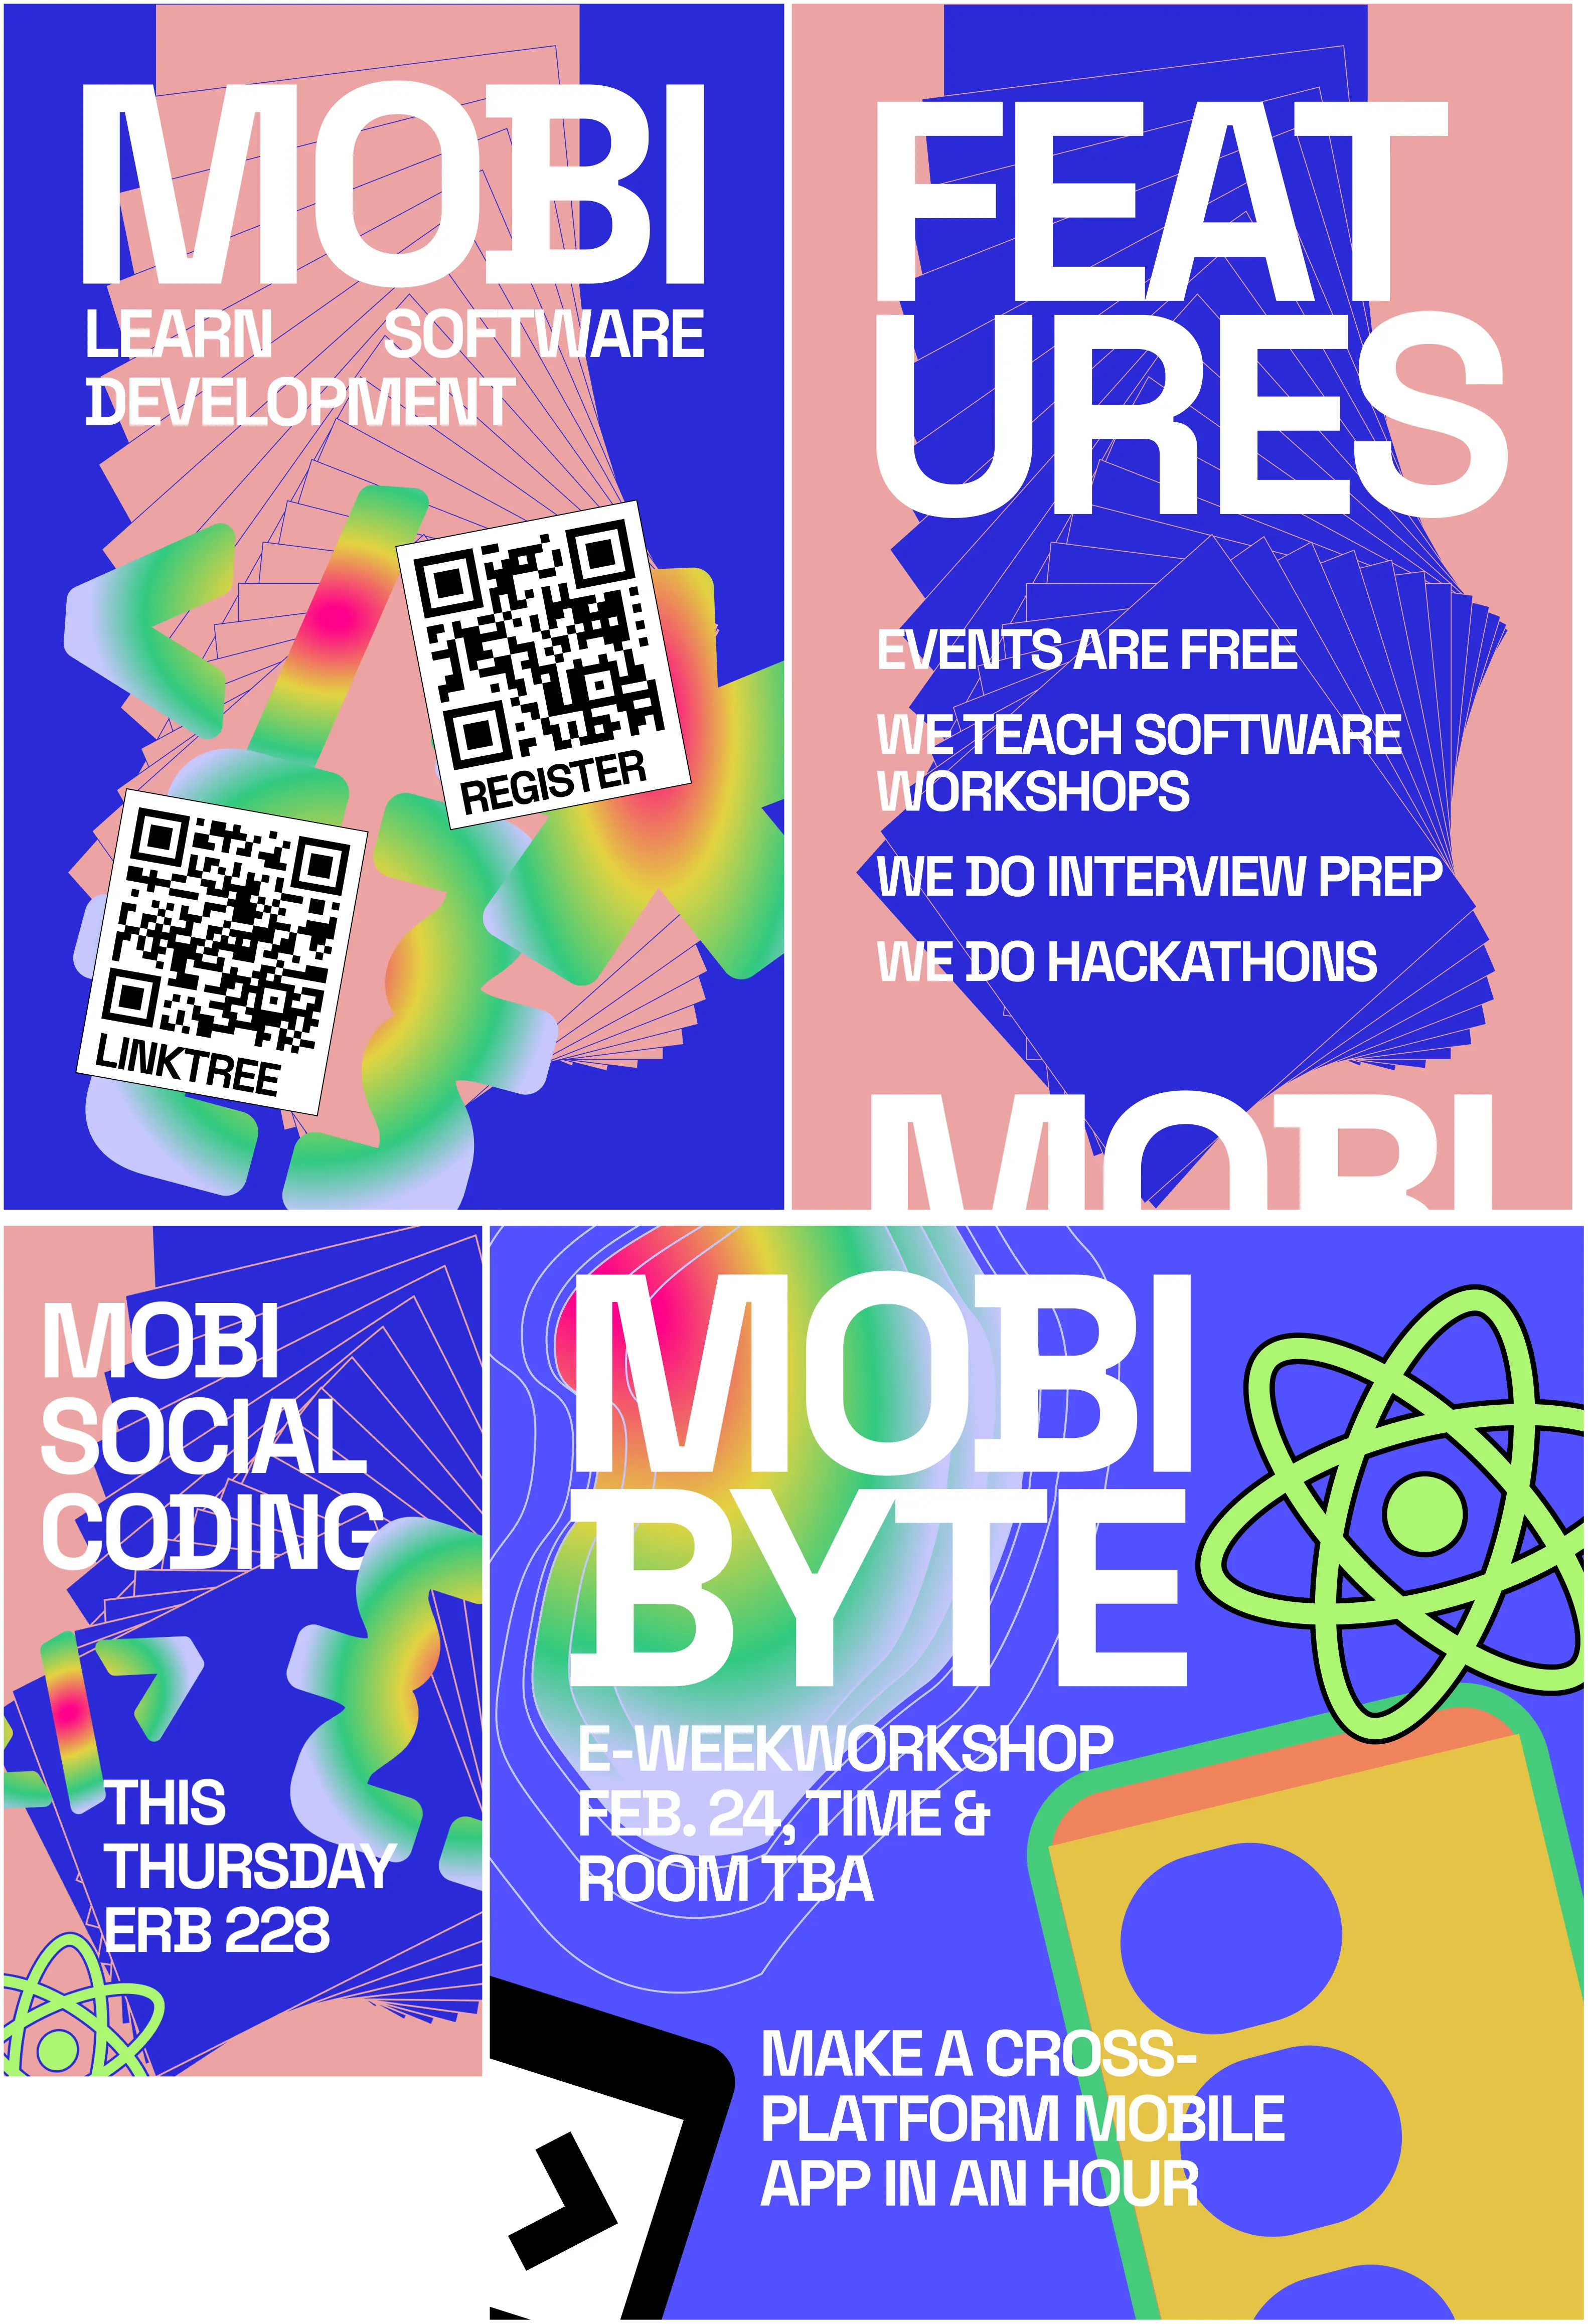 Digital designs of MOBI marketing materials. It's covered with highly saturated blue, green, and yellow colors with coding symbols mixed around. There are designs for flyers and social media.